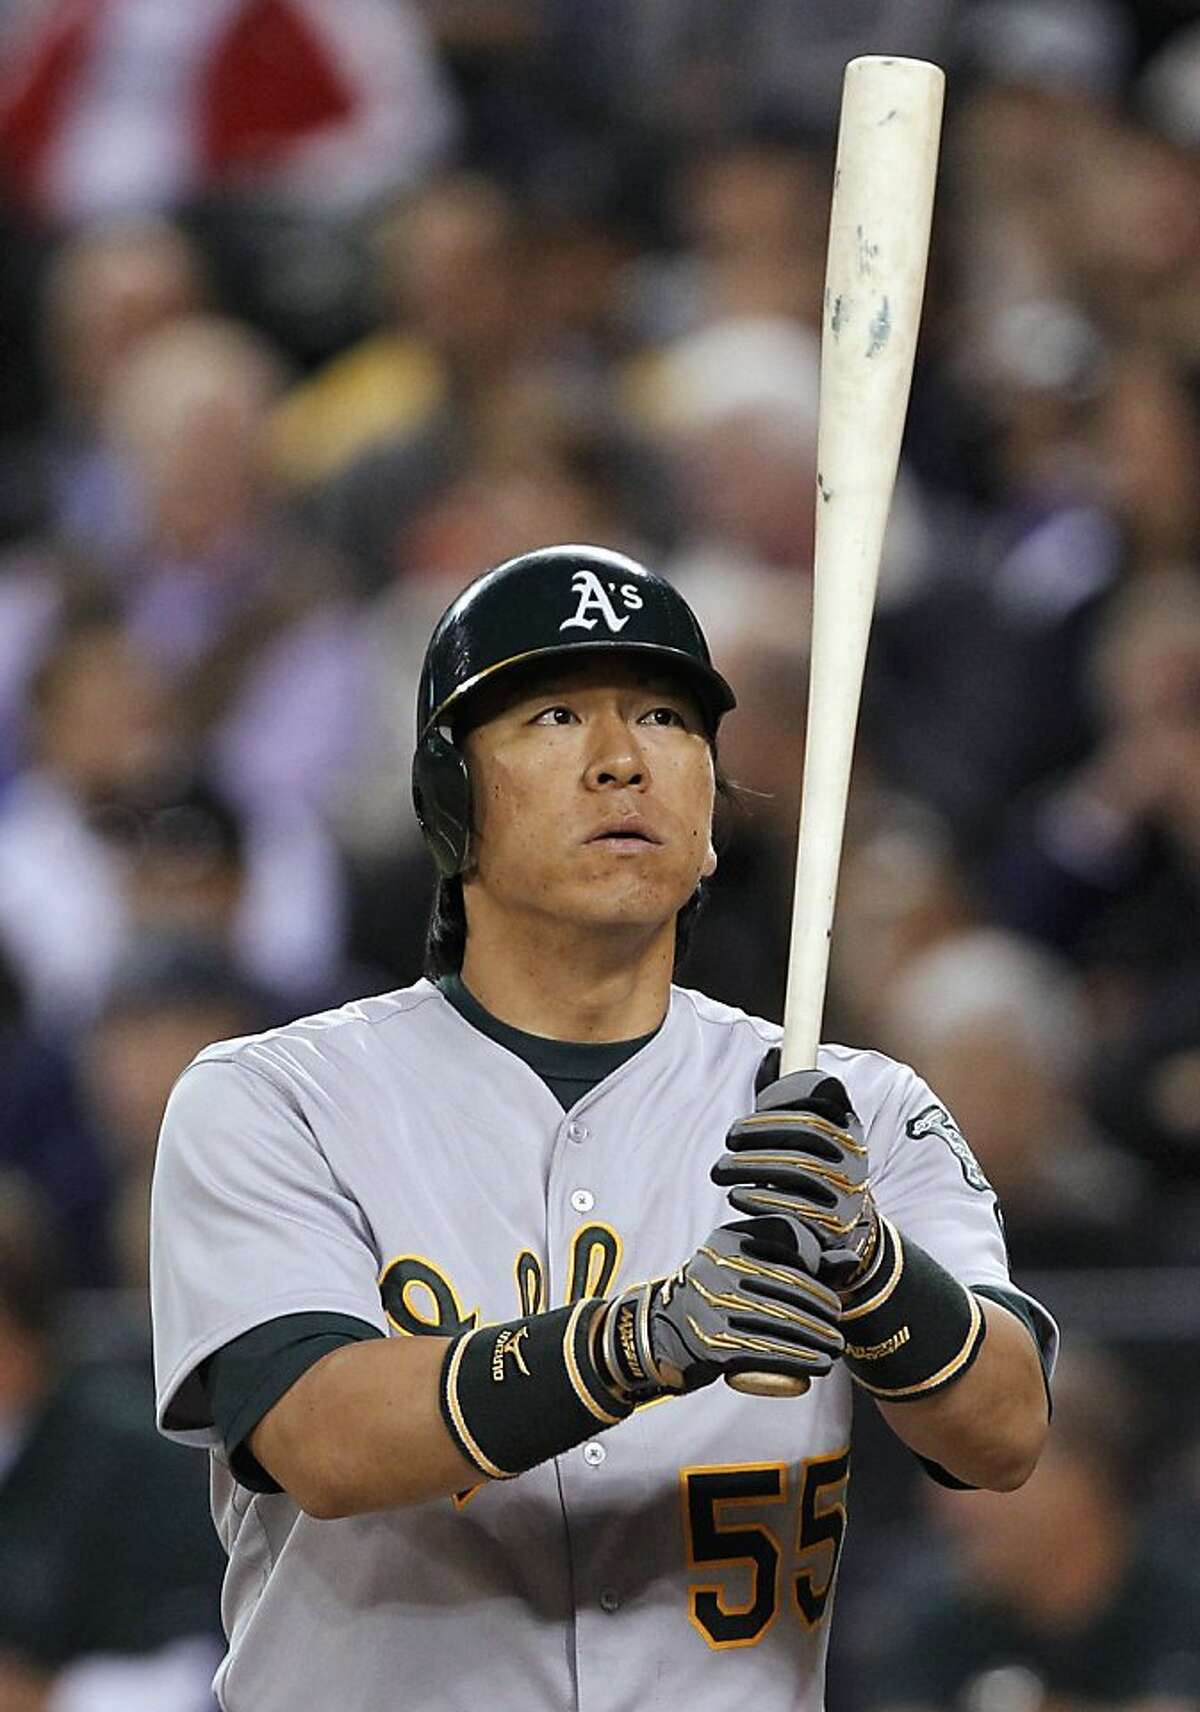 Oakland Athletics' Hideki Matsui looks up at his bat during his at-bat against the Seattle Mariners in the first inning of a baseball game Tuesday, Sept. 27, 2011, in Seattle. Matsui singled on the at-bat. (AP Photo/Elaine Thompson)